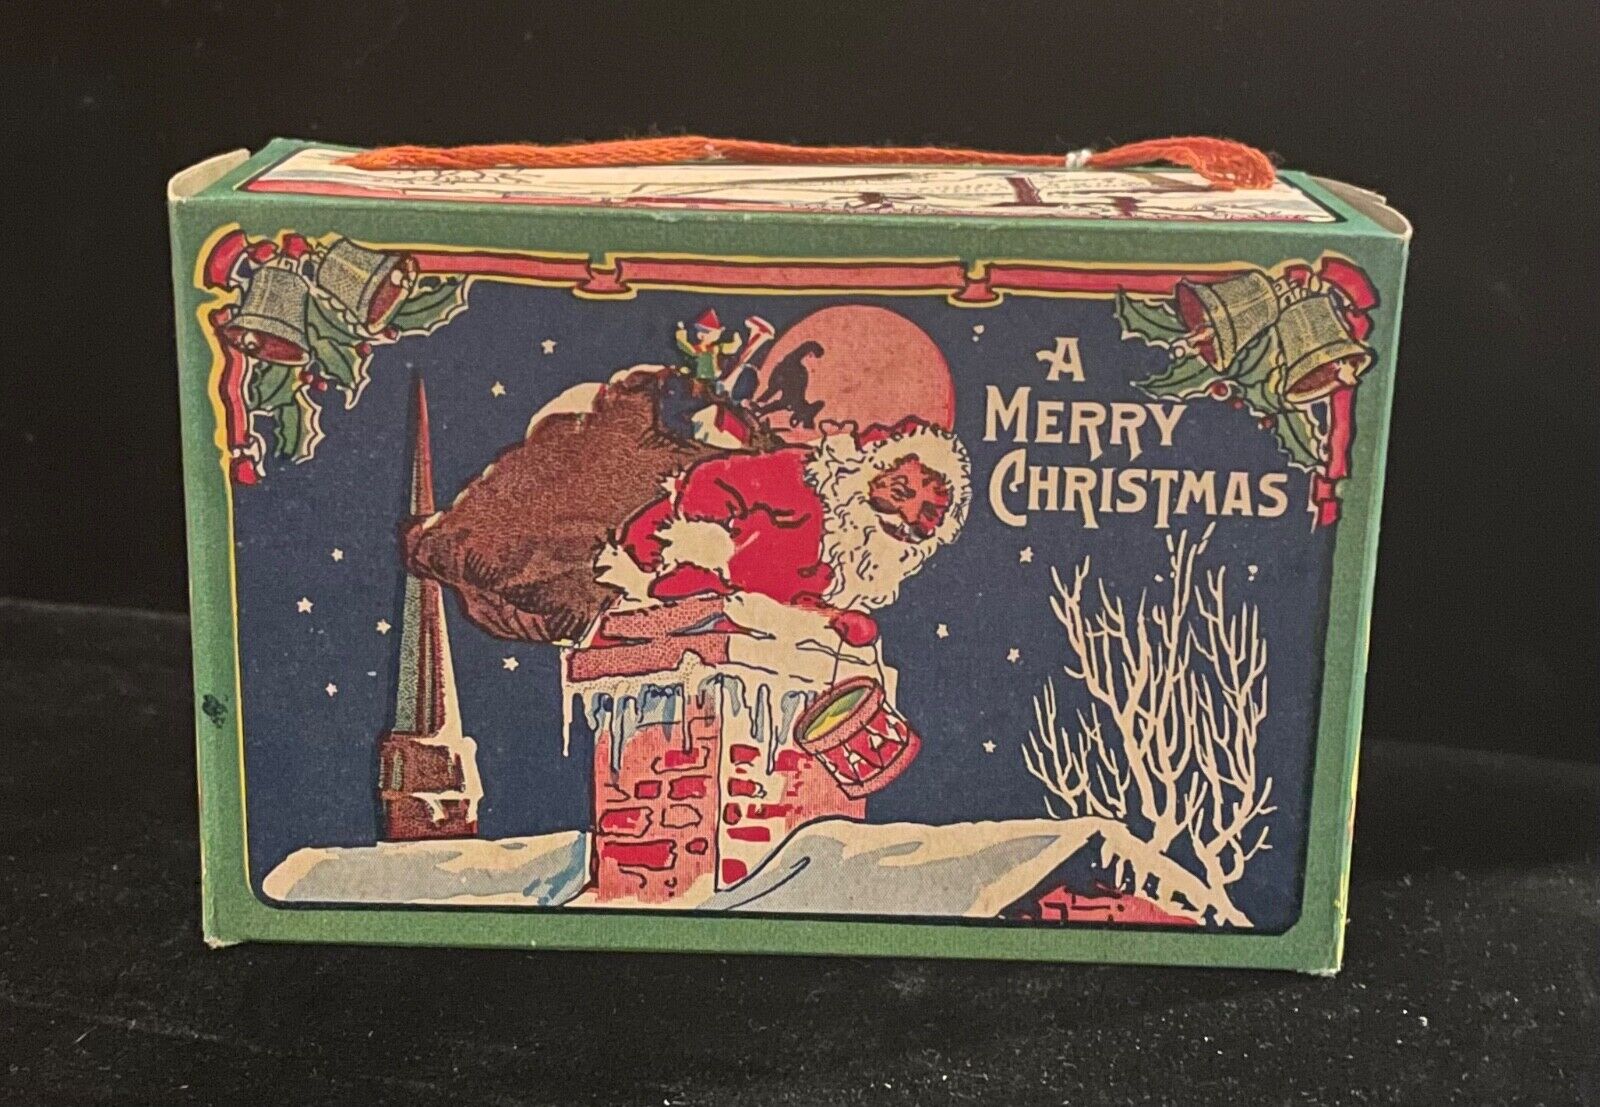 Vintage Christmas and New Year Cardboard Candy Box. 1920. Excellent condition.